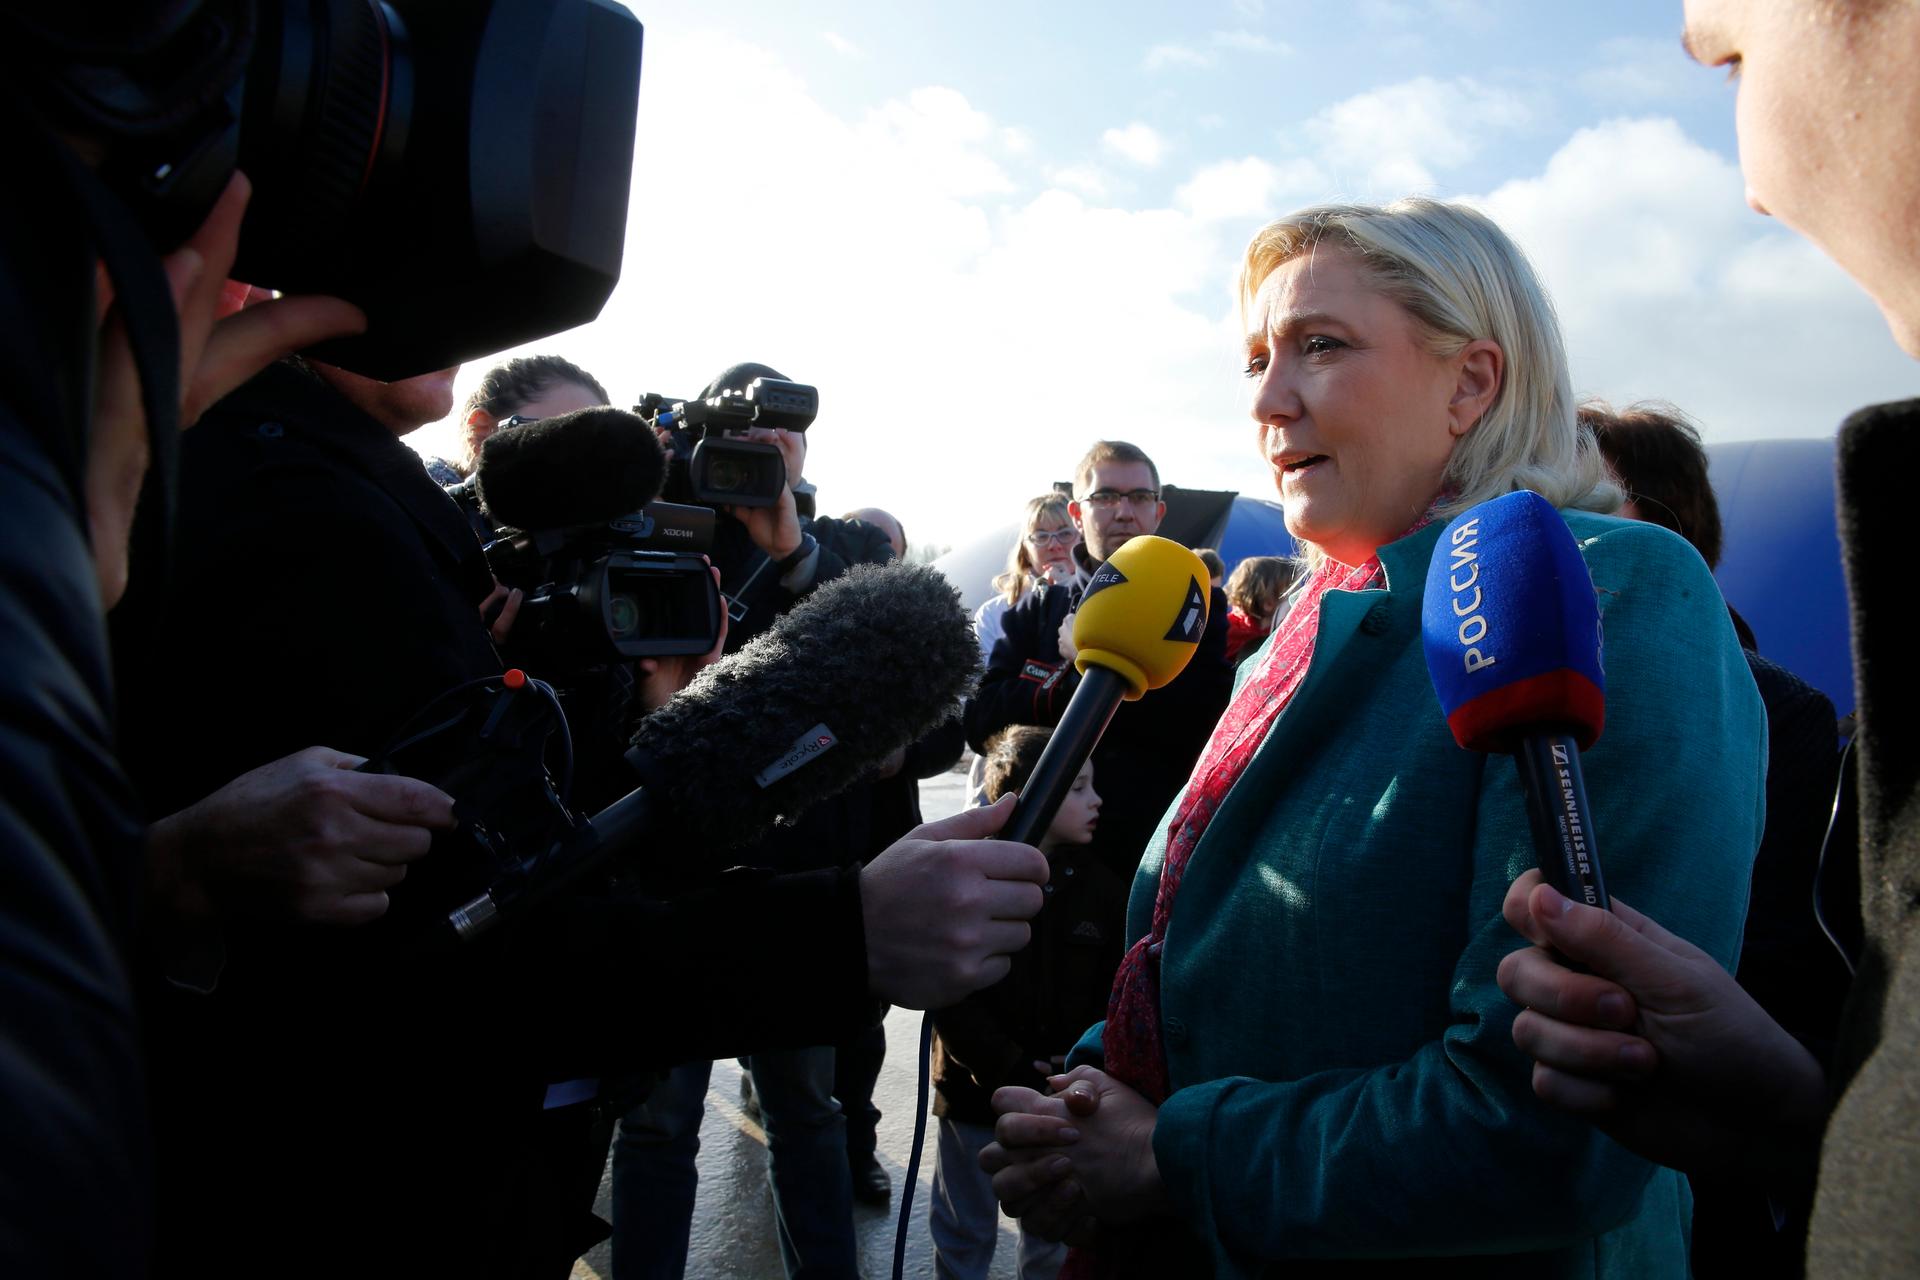 Marine Le Pen, French National Front political party leader and candidate for the National Front in the Nord-Pas-de-Calais-Picardie region, is surrounded by media as she campaigns for the upcoming regional elections